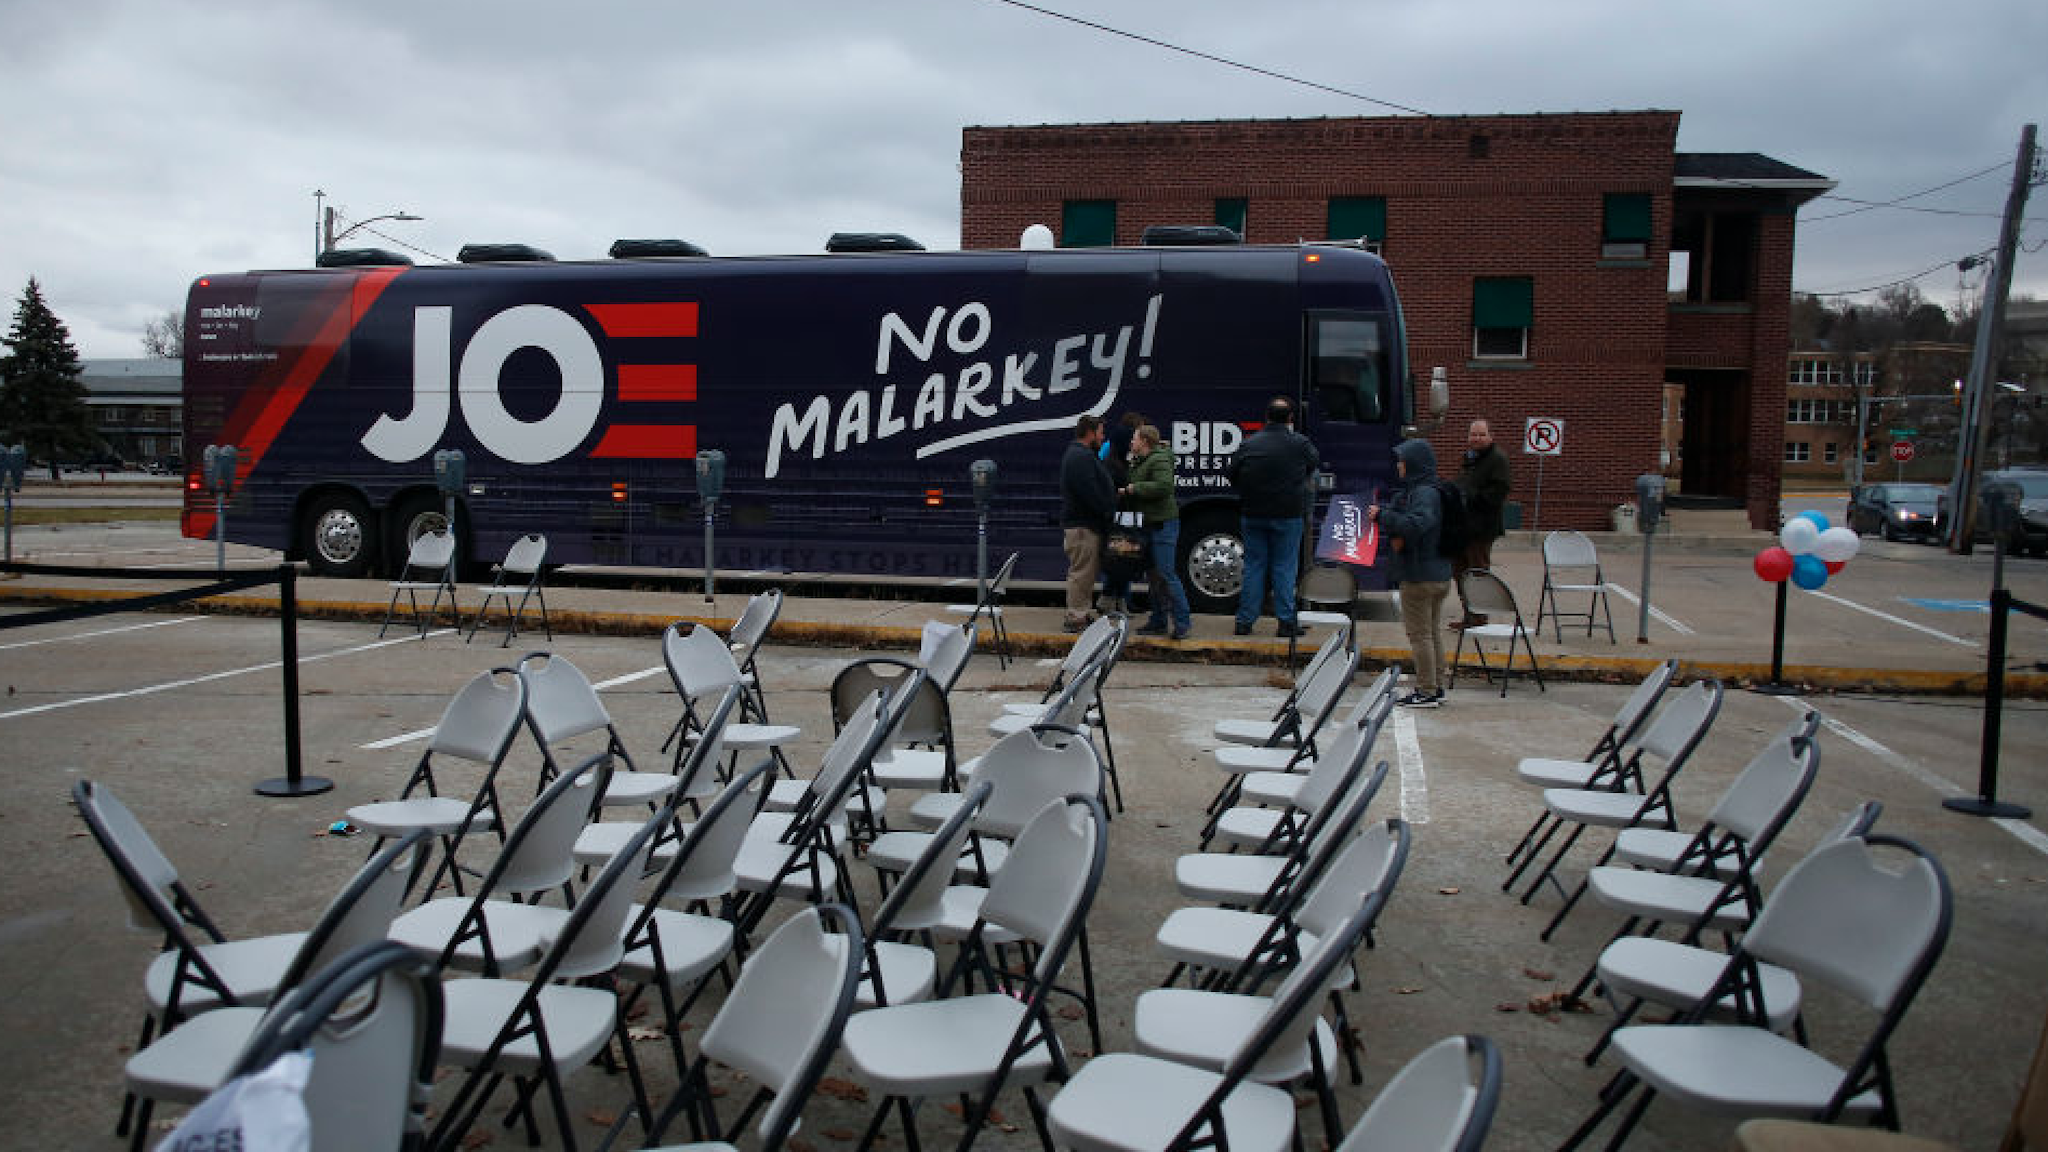 The bus of Democratic presidential candidate, former Vice President Joe Biden sits in a parking lot after a campaign event on November 30, 2019 in Council Bluffs, Iowa.